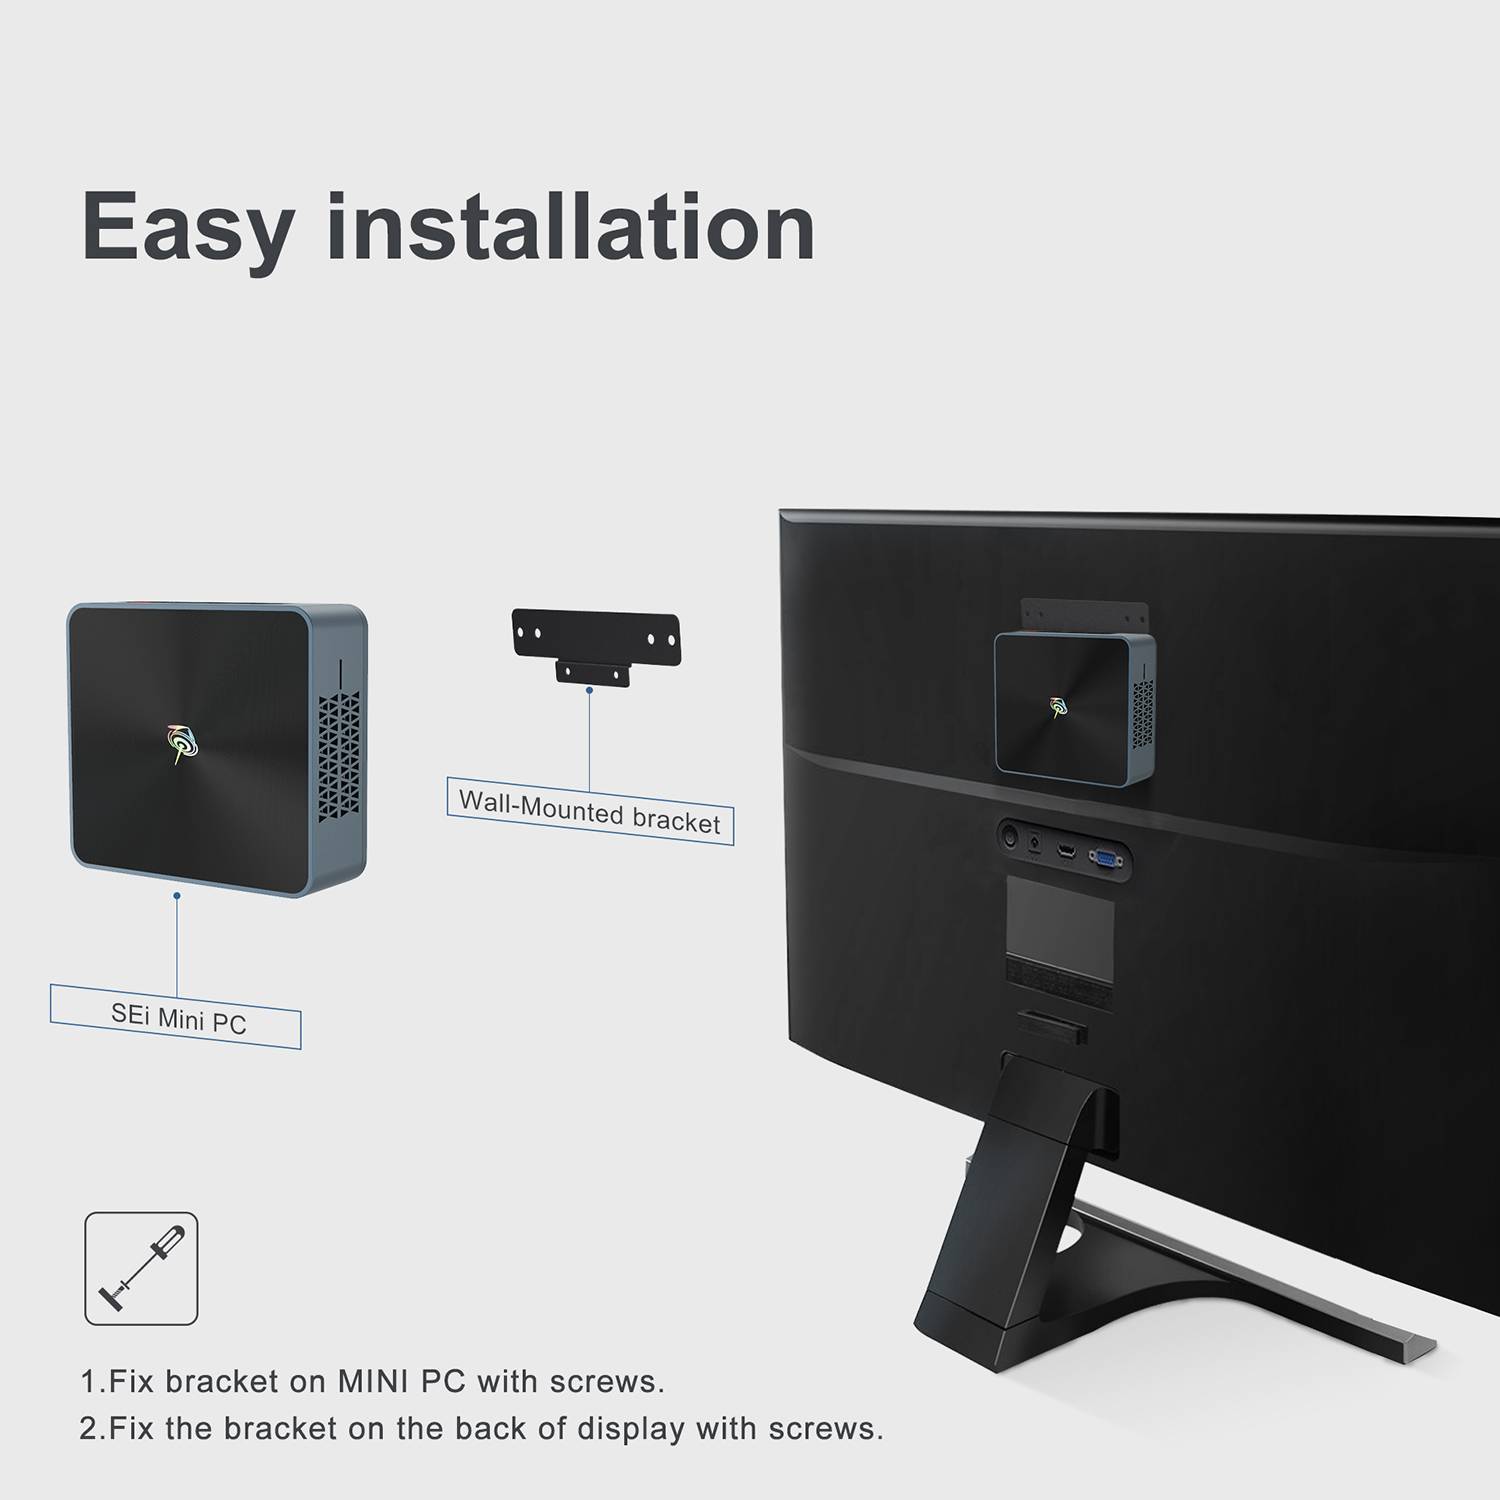 Beelink SEi 10 i3 Mini PC showing back of tv support